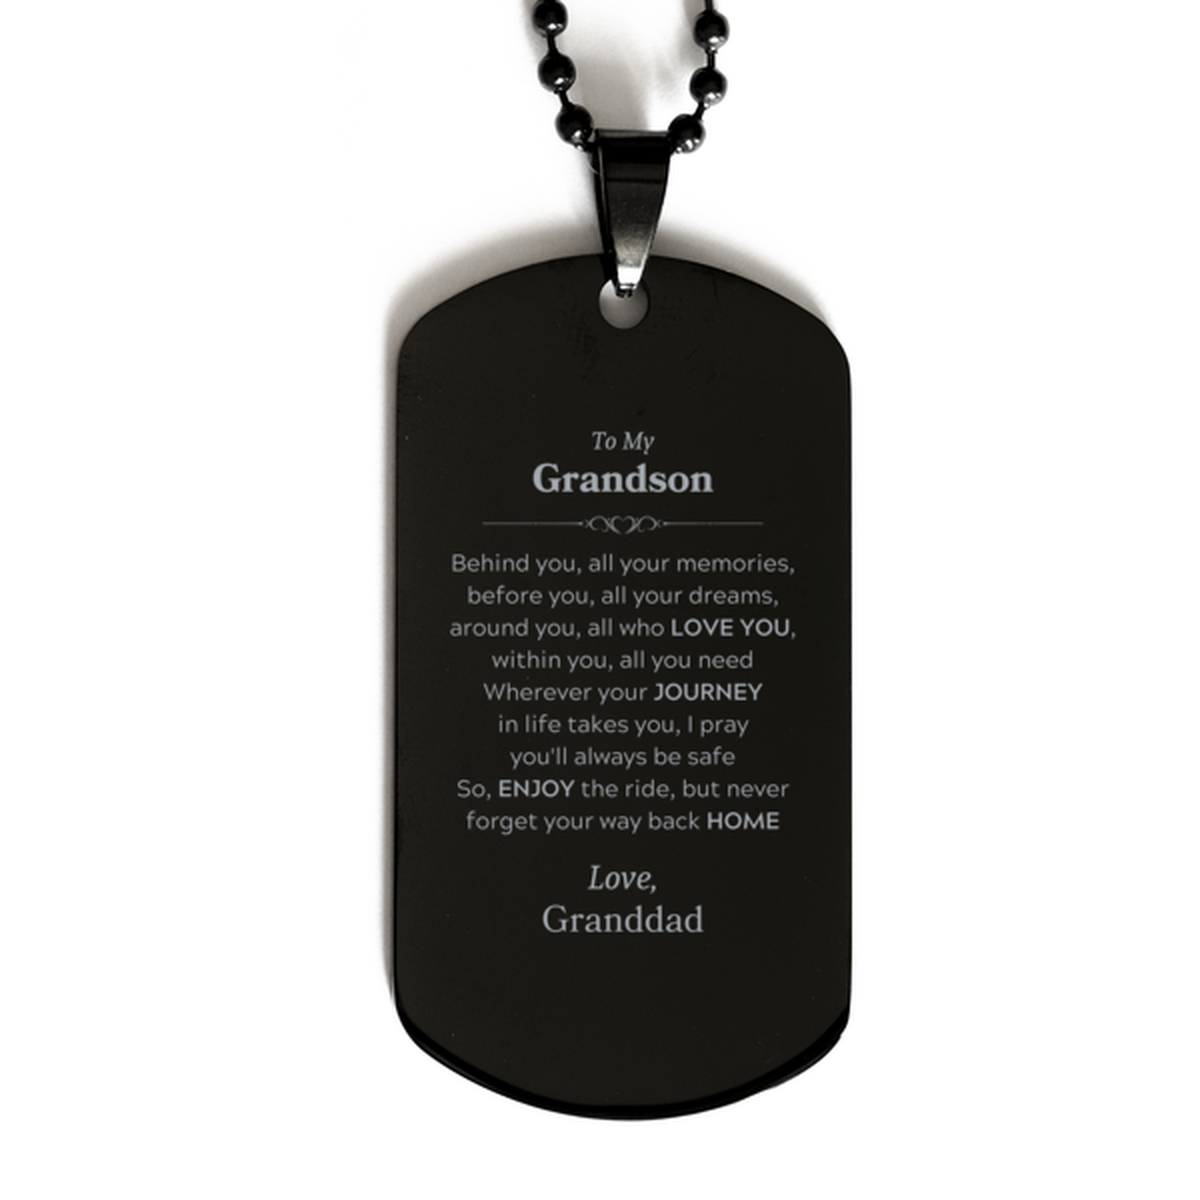 To My Grandson Graduation Gifts from Granddad, Grandson Black Dog Tag Christmas Birthday Gifts for Grandson Behind you, all your memories, before you, all your dreams. Love, Granddad